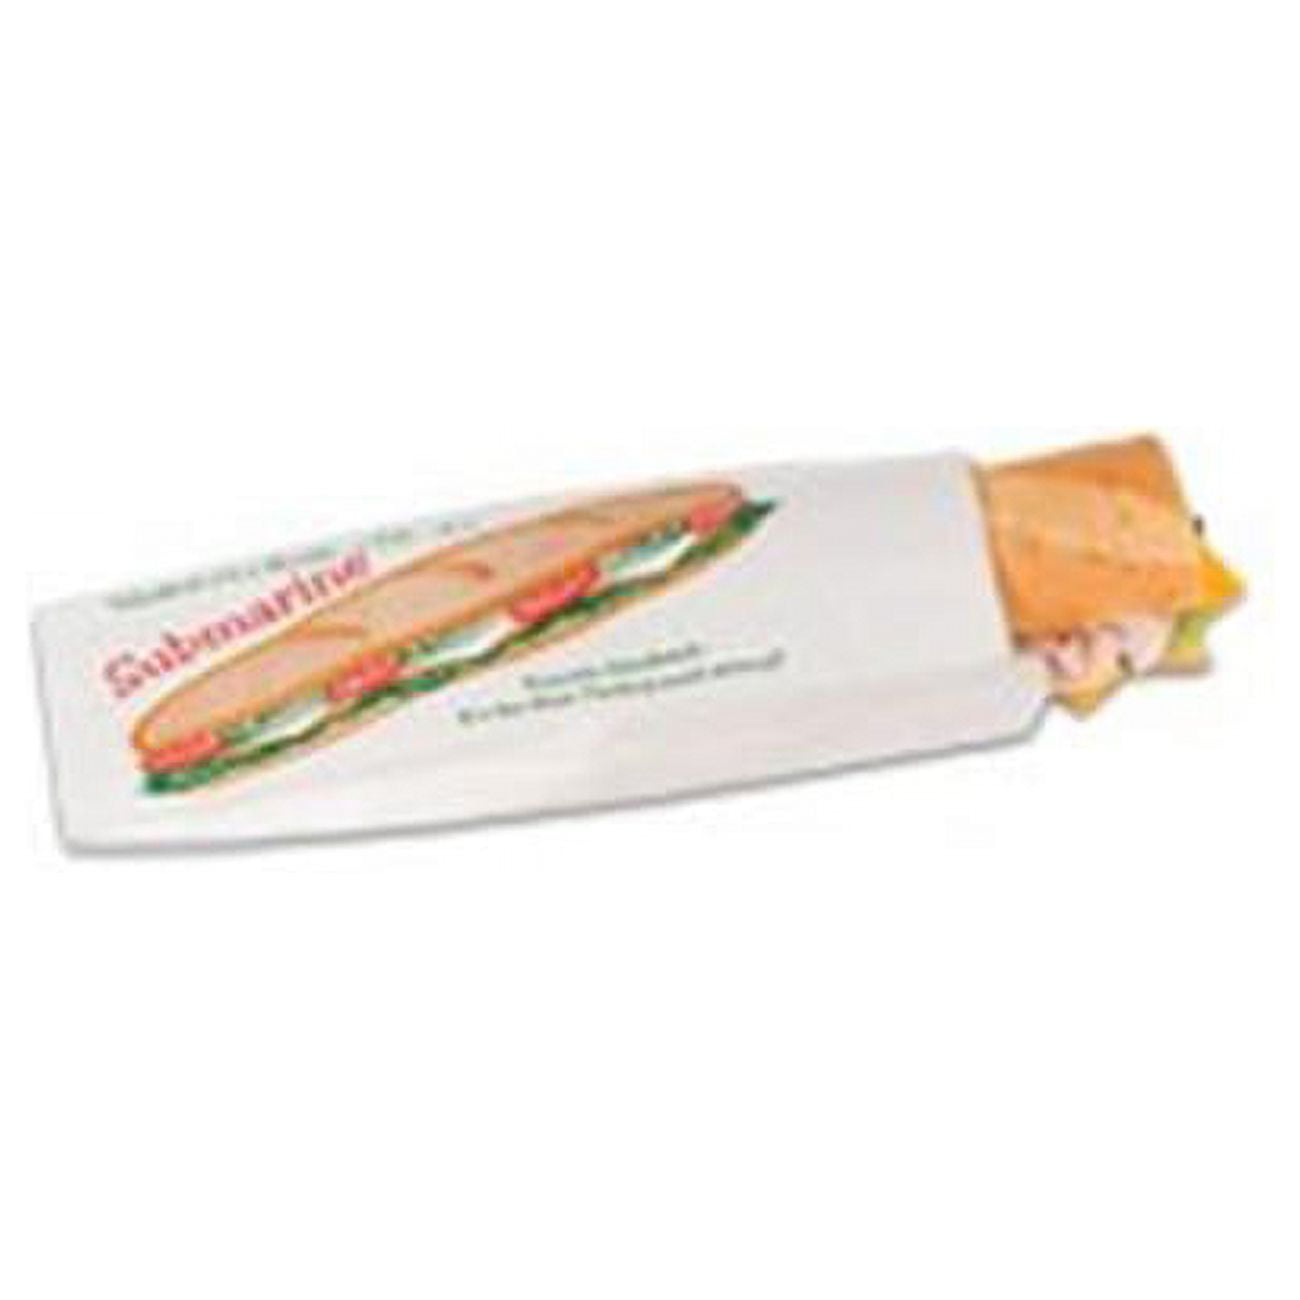 Picture of Bagcraft 300435 4.5 x 2 x 14 in. Submarine Sandwich Bag - Case of 1000